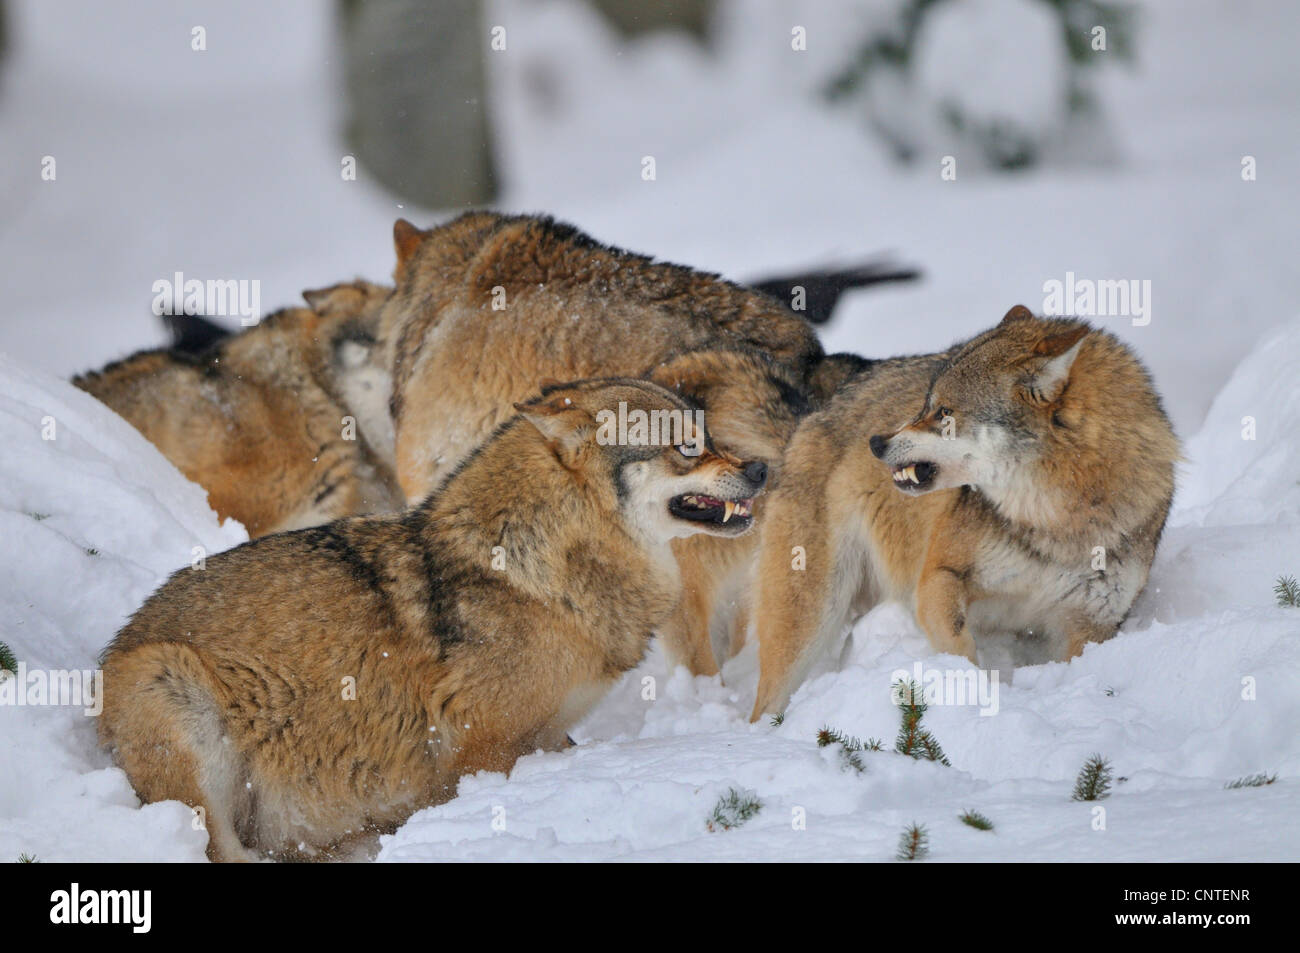 European gray wolf (Canis lupus lupus), two individuals on snow at conflict, Germany Stock Photo